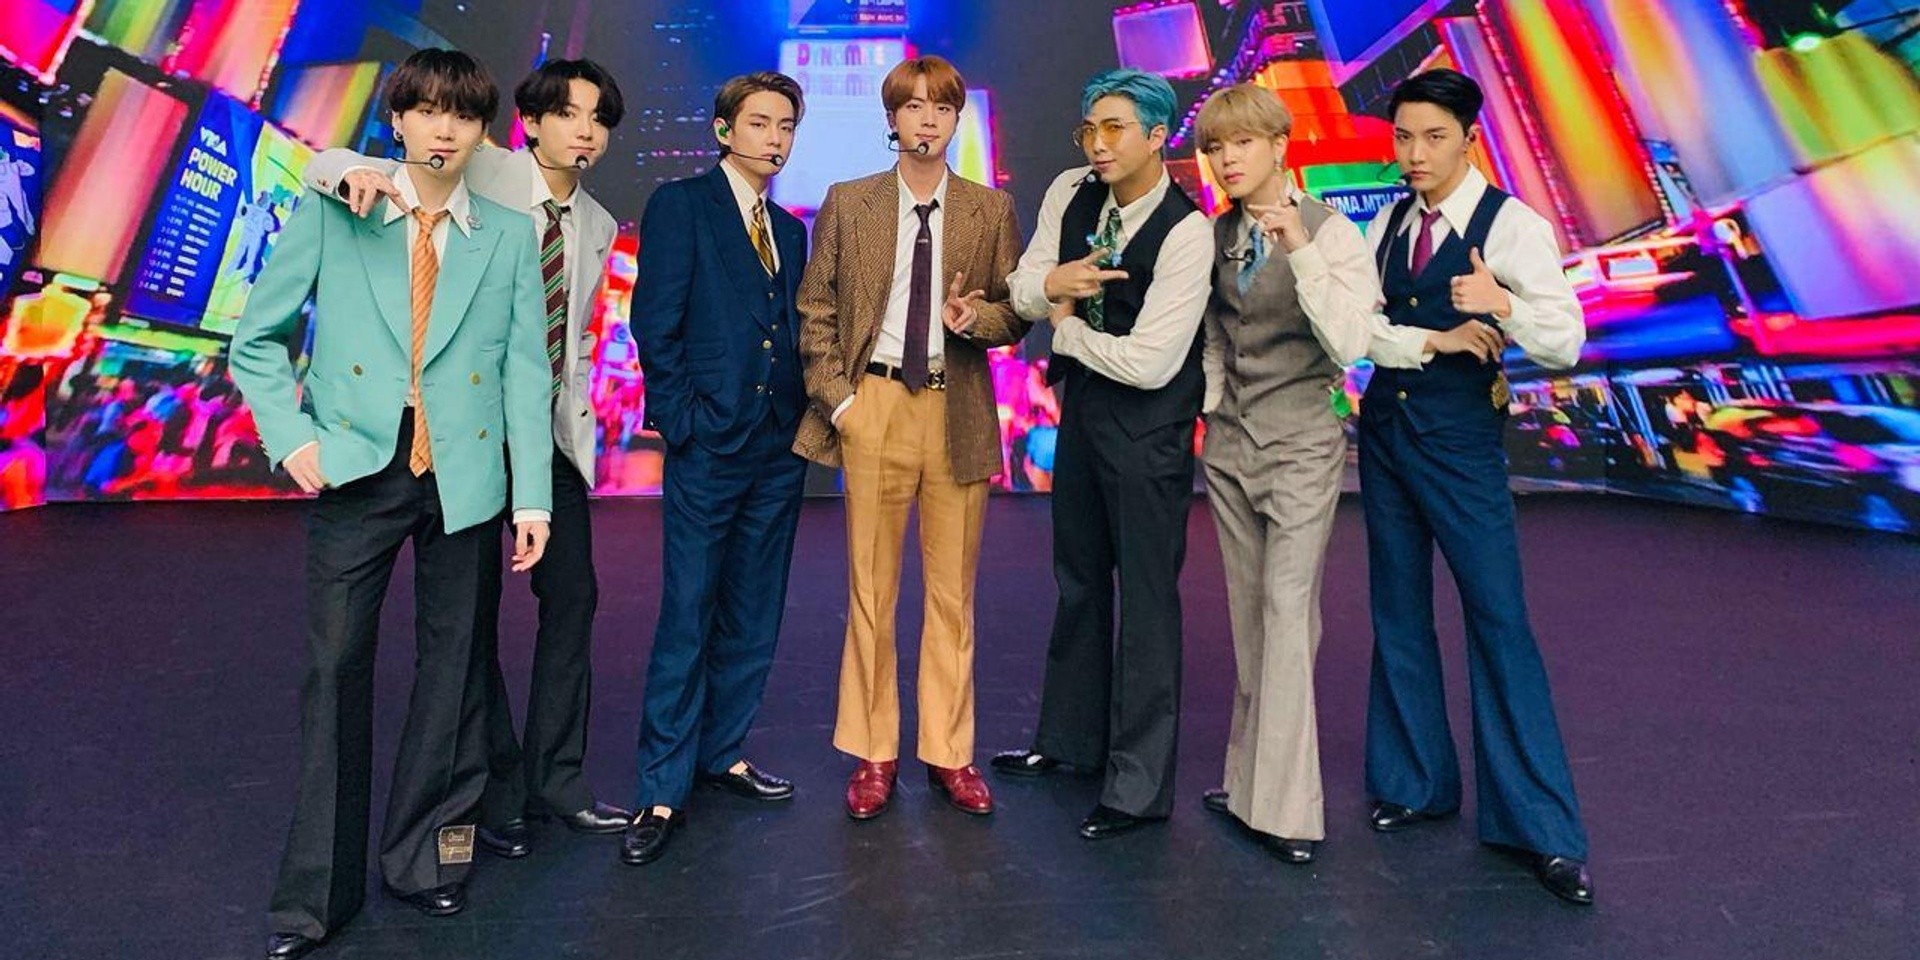 BTS smash hit ‘Dynamite’ projected to generate US$1.4 billion for South Korea’s economy 